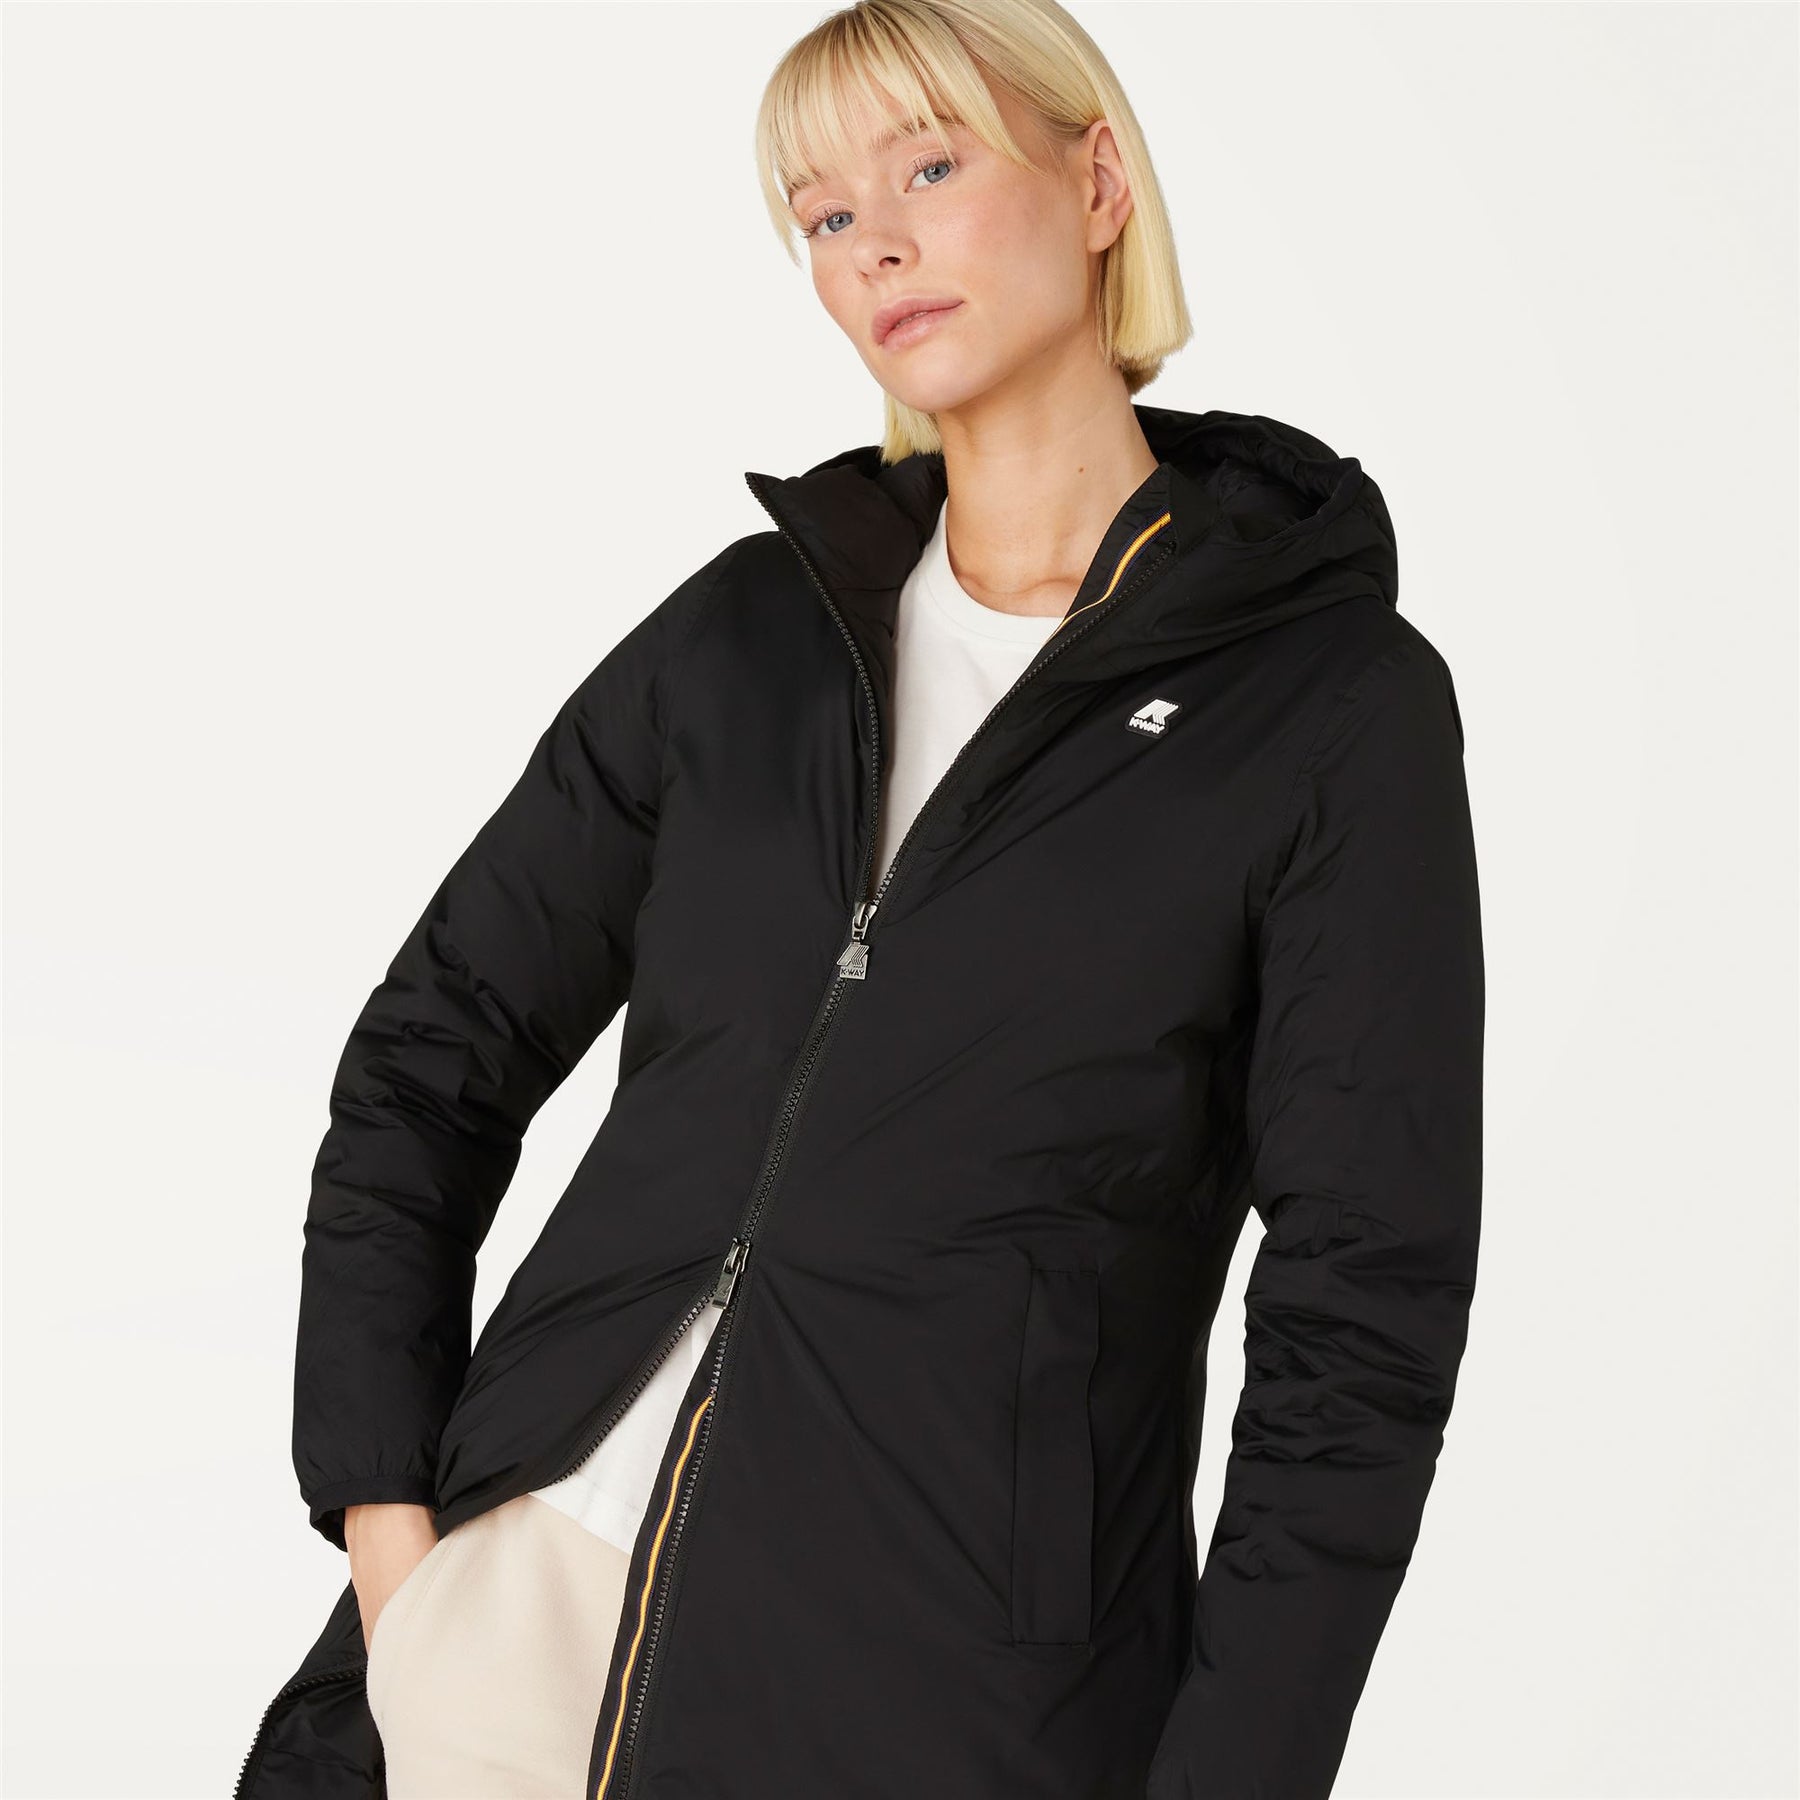 Suzanne Thermo Stretch - Women Hooded Waterproof Coat in Black Pure